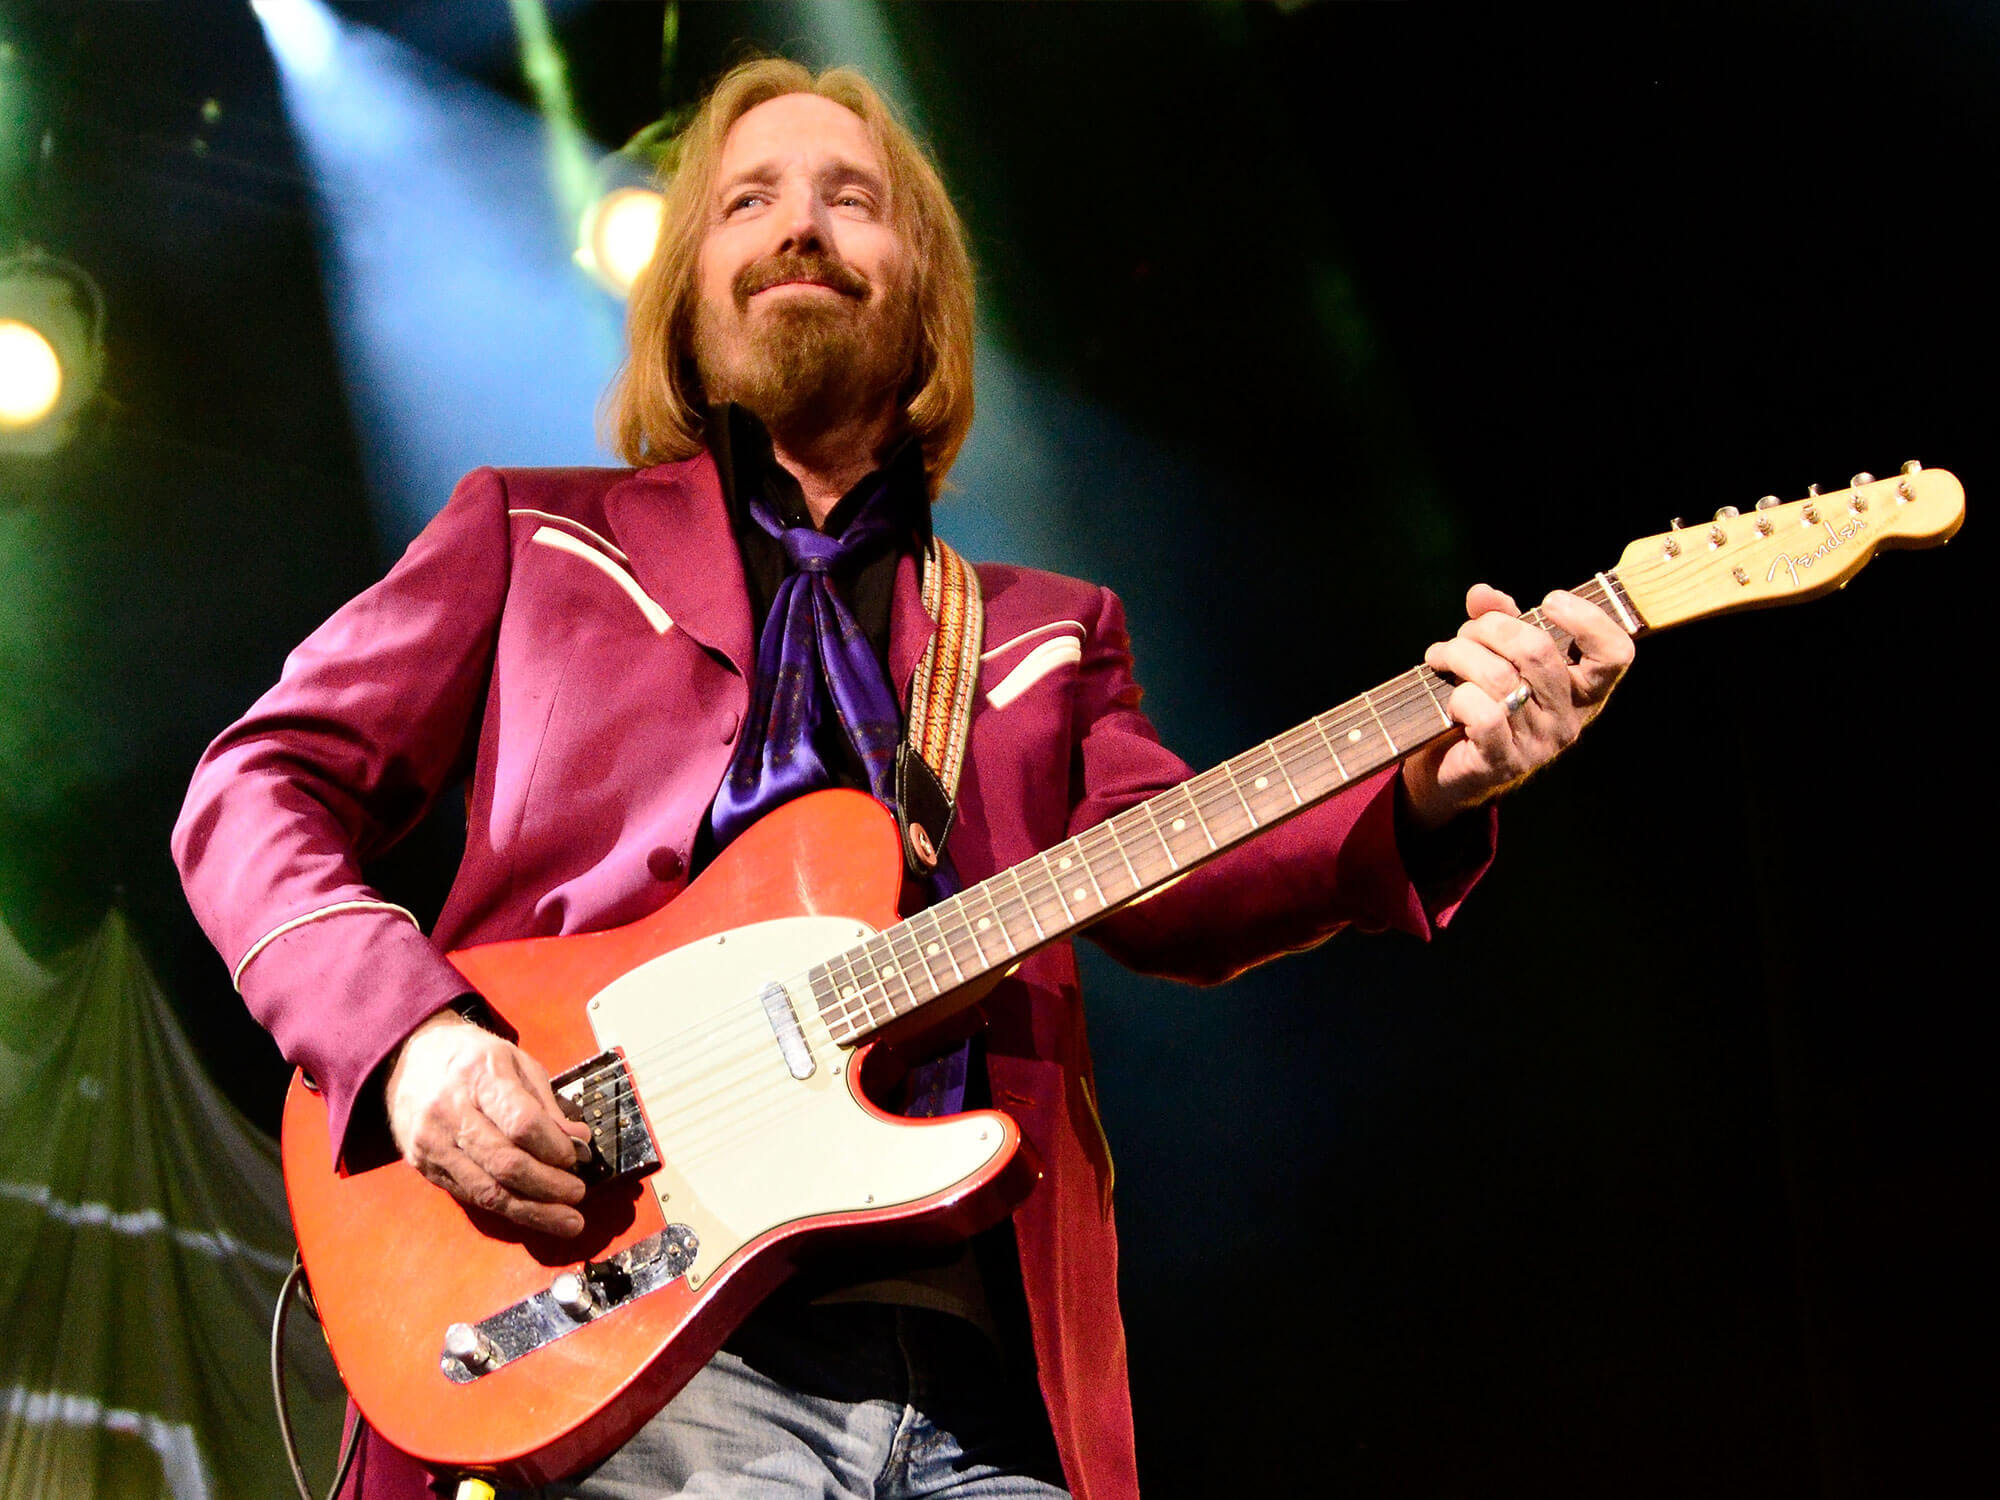 Tom Petty performing live